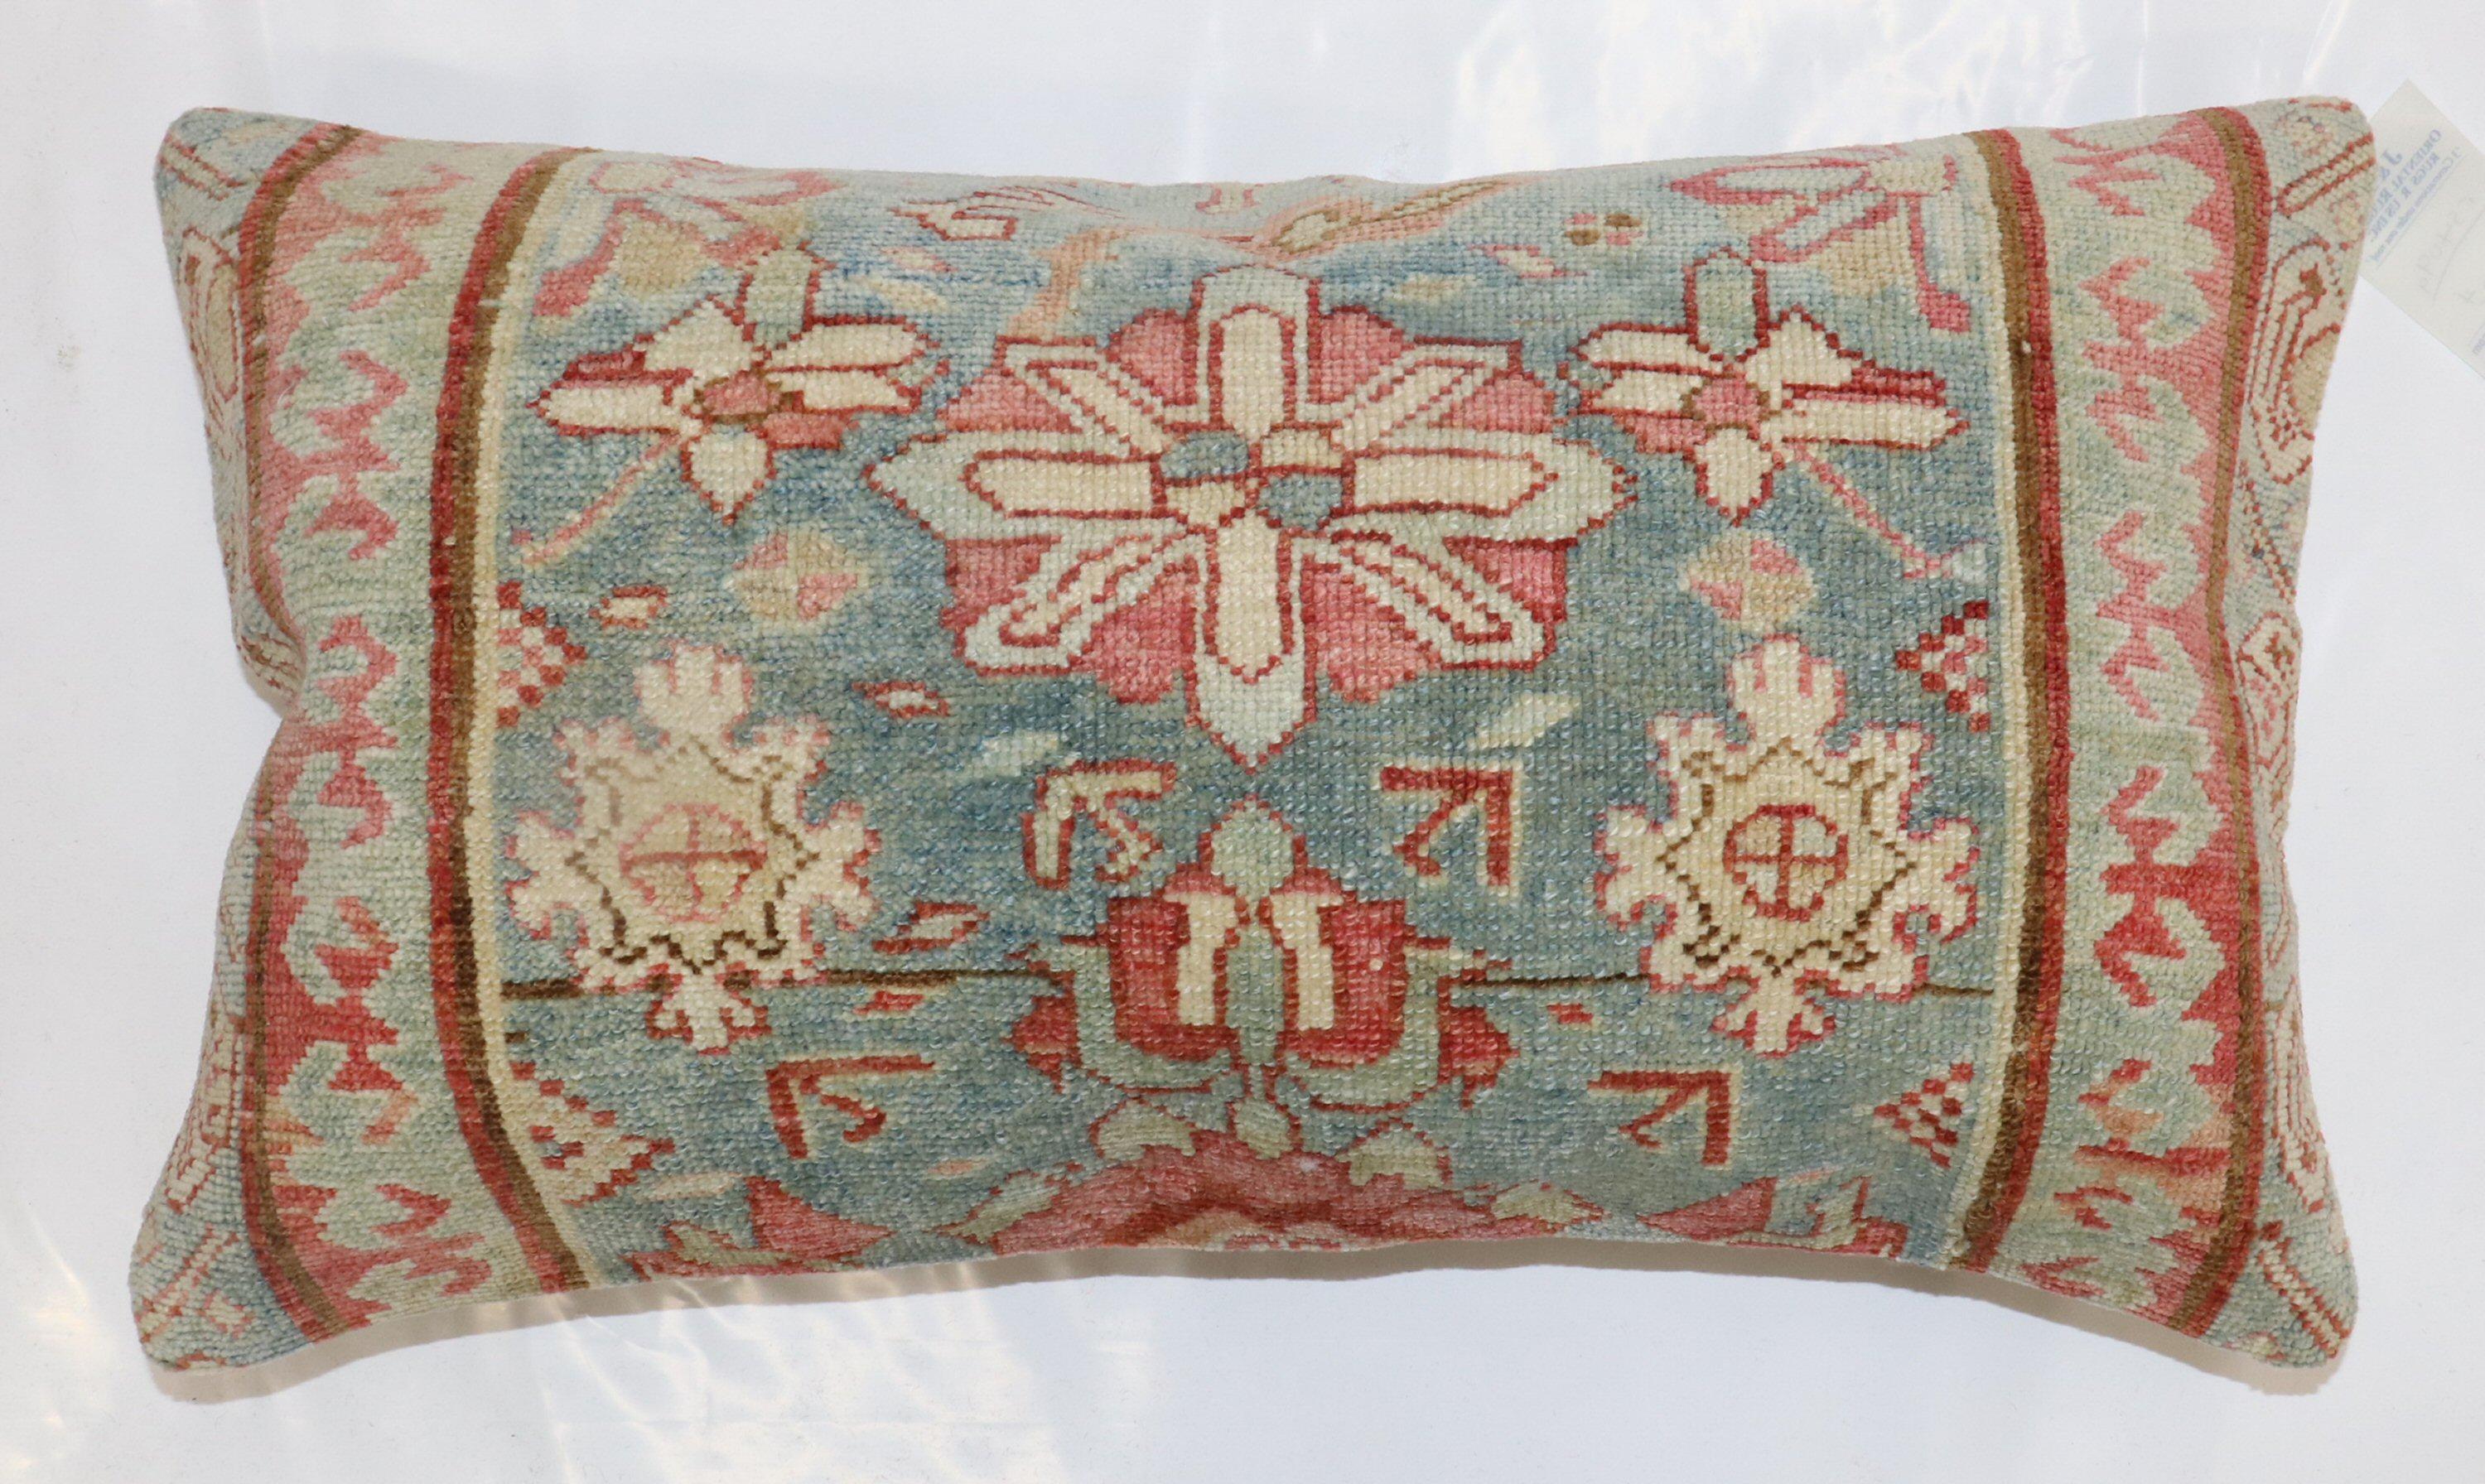 Pillow made from an antique Malayer rug with cotton back and zipper closure.

Measures: 1'4'' x 2'4''.